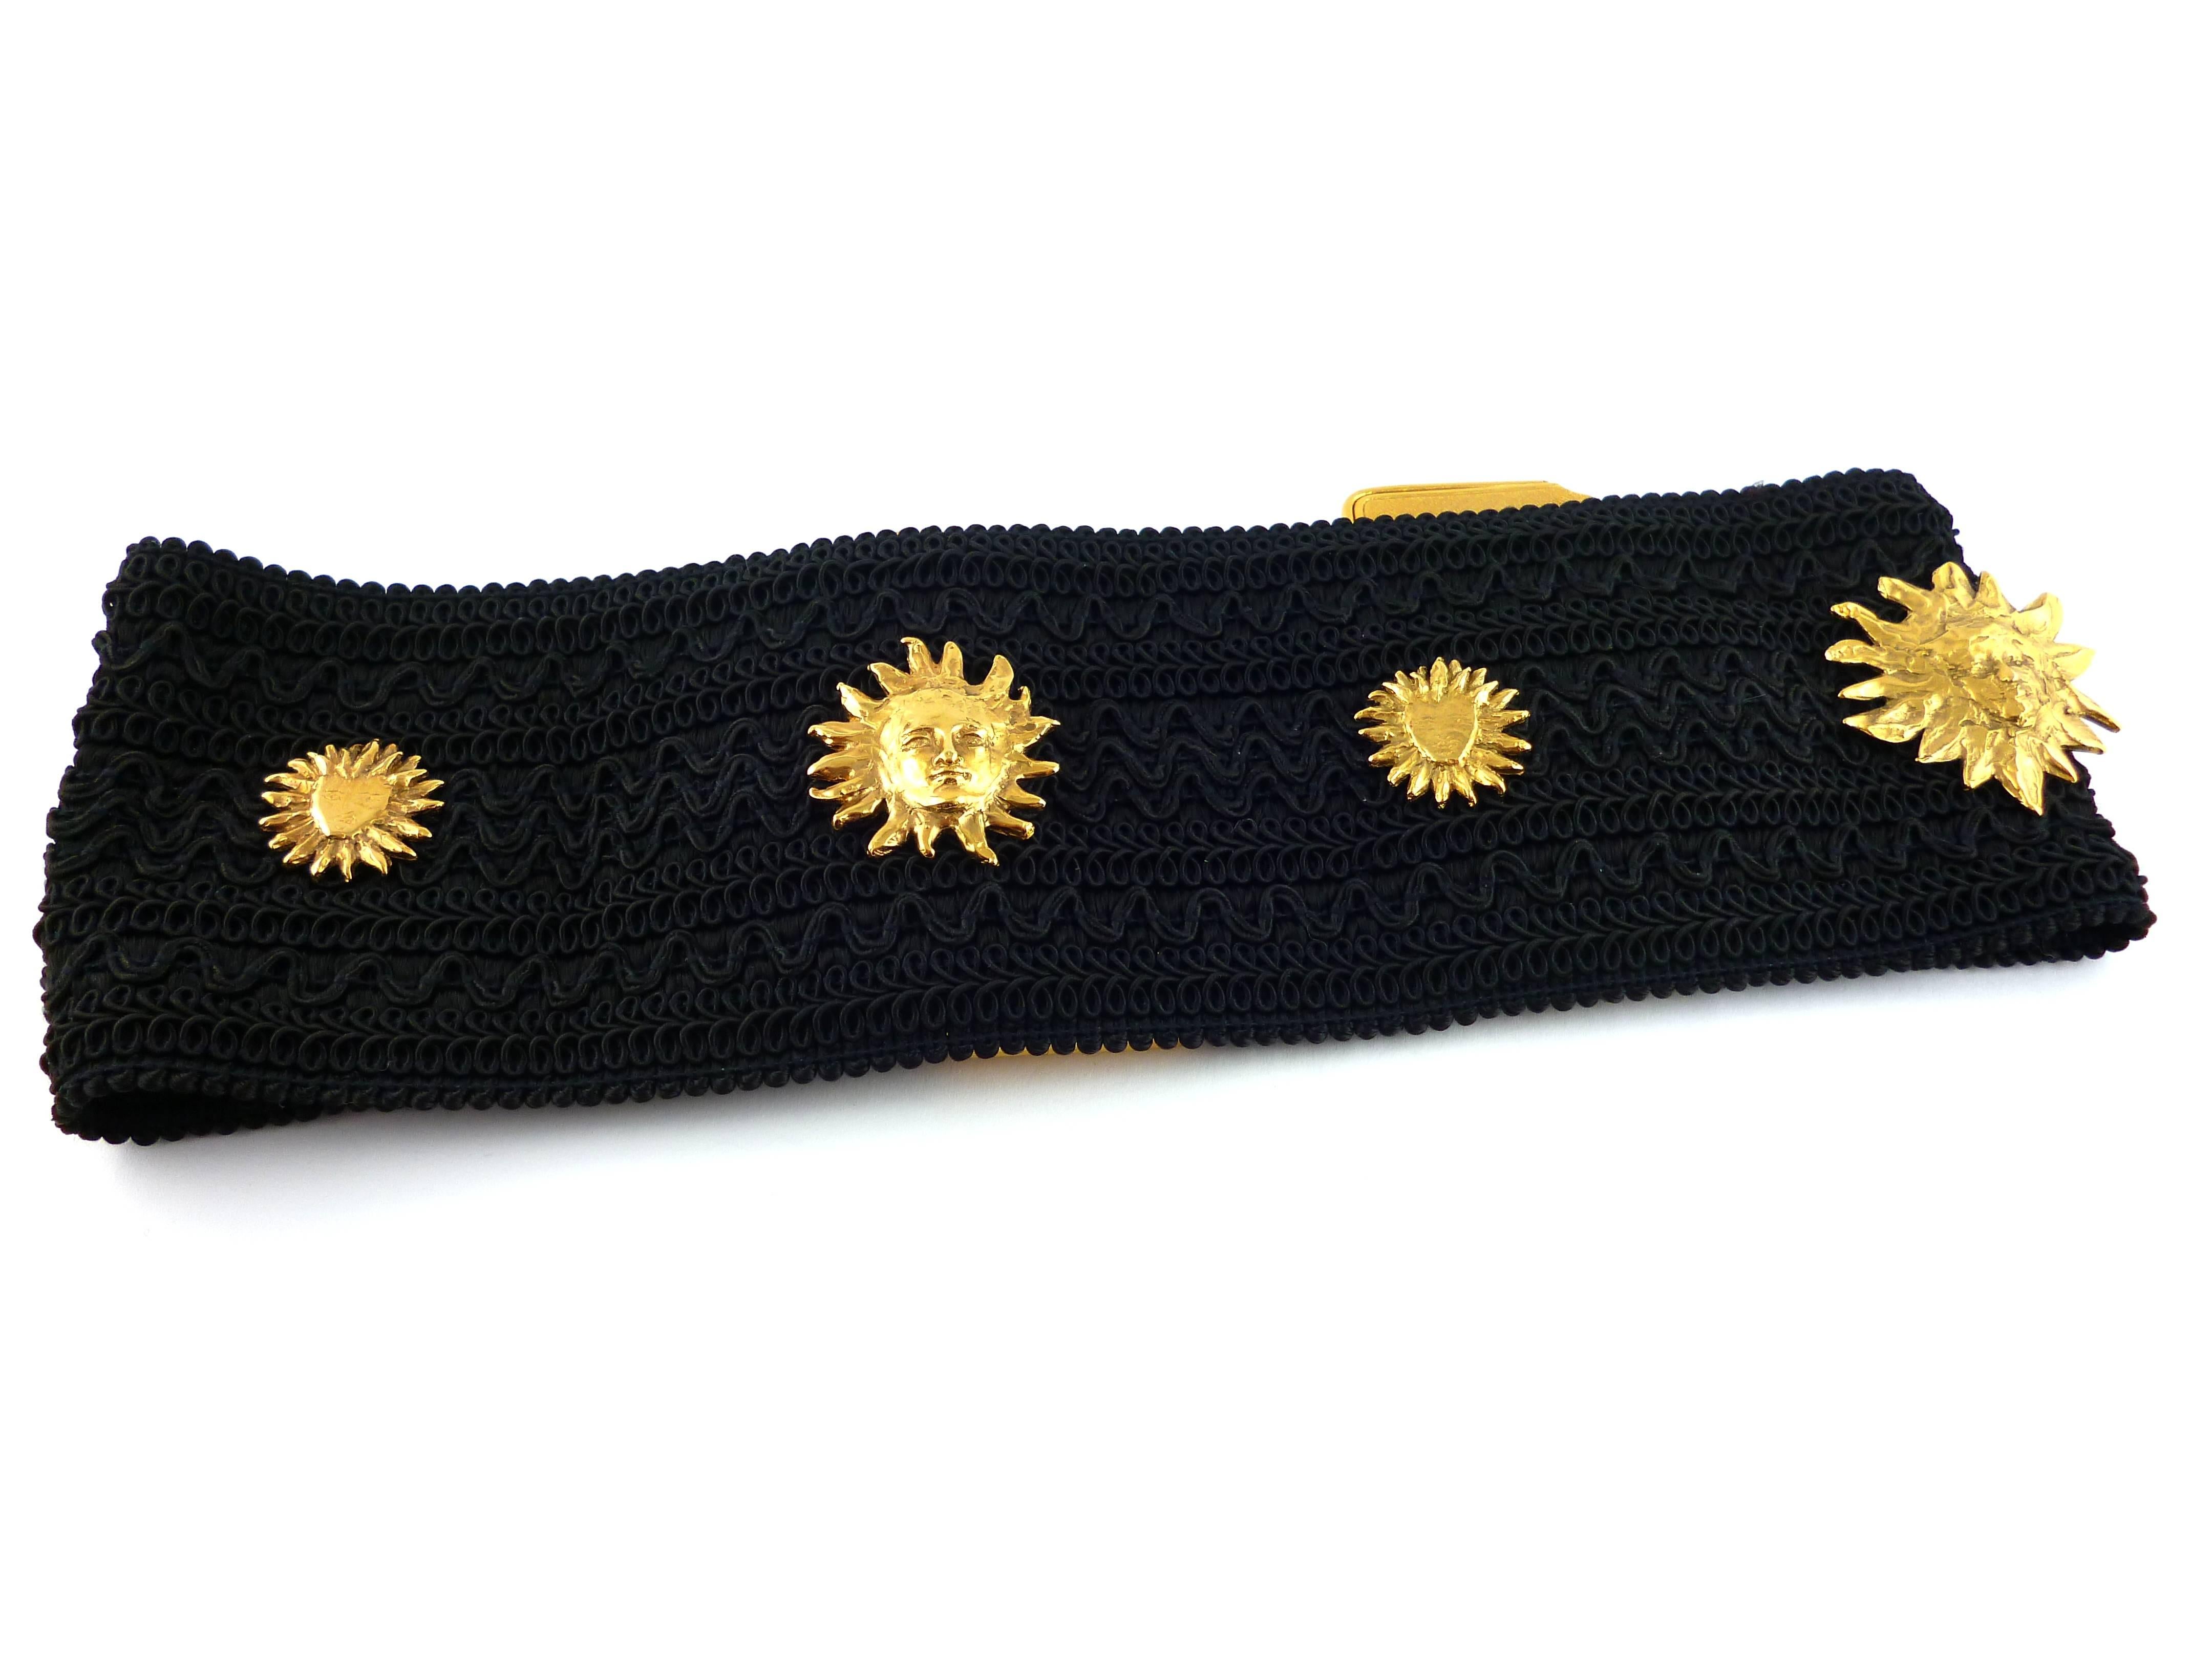 YVES SAINT LAURENT vintage wide waist belt with sun face theme.

Textured stretch black fabric with gold plated hardware.

S-shaped closure.

One size fits all.

Marked YSL Made in France.

Indicative weight : 480 grams.

BELT CONDITION CHART
- New